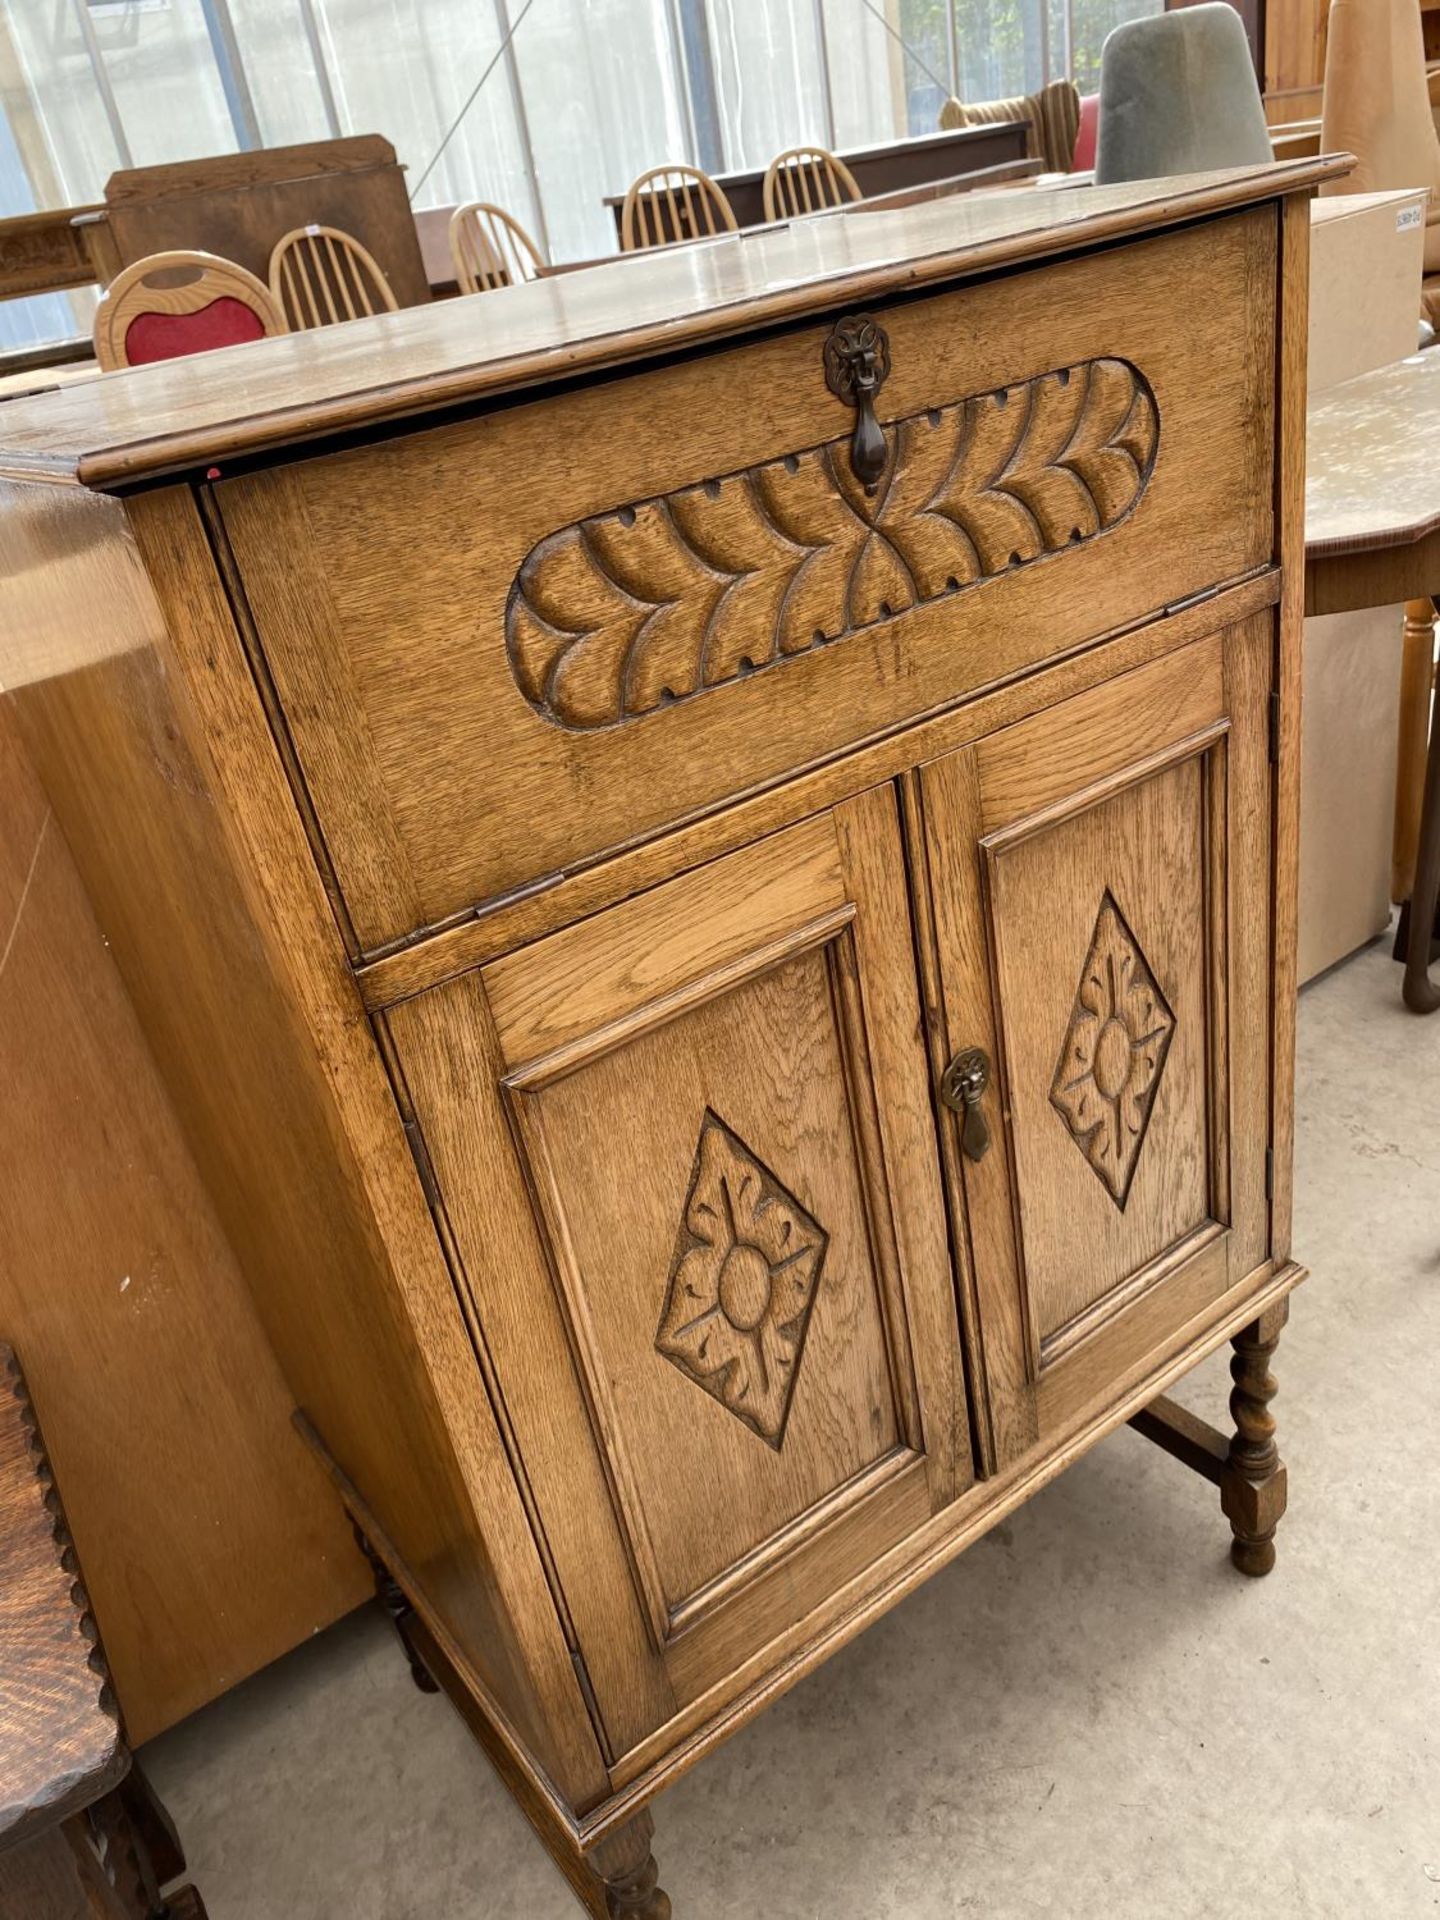 AN EARLY 20TH CENTURY TWO DOOR CABINET ON BARLEY TWIST LEGS - Image 2 of 5